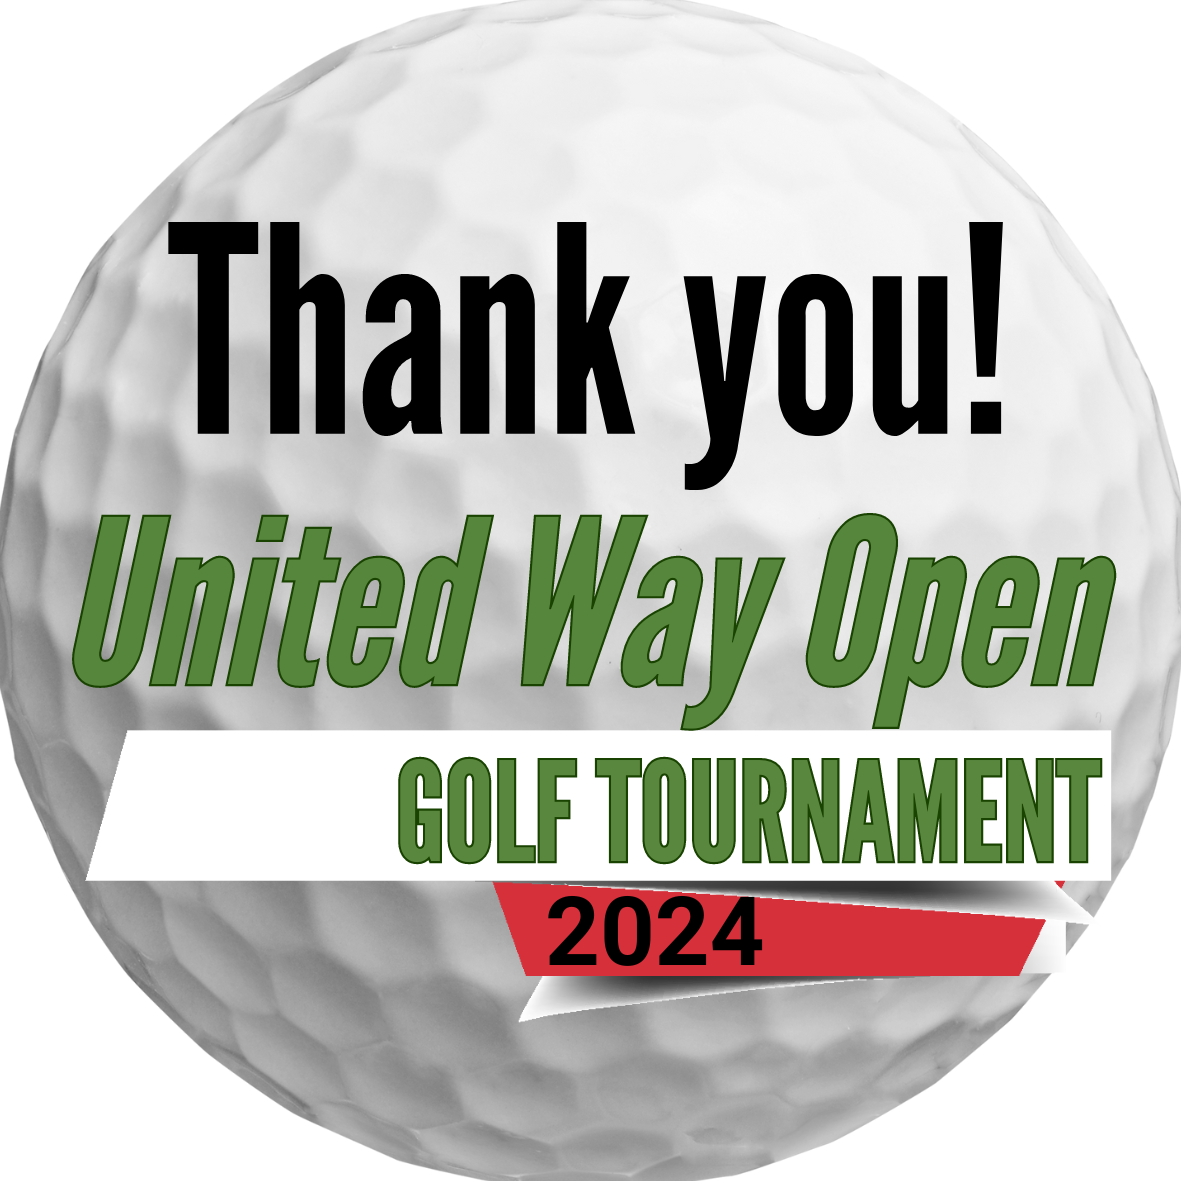 Thank you United way open golf tournament 